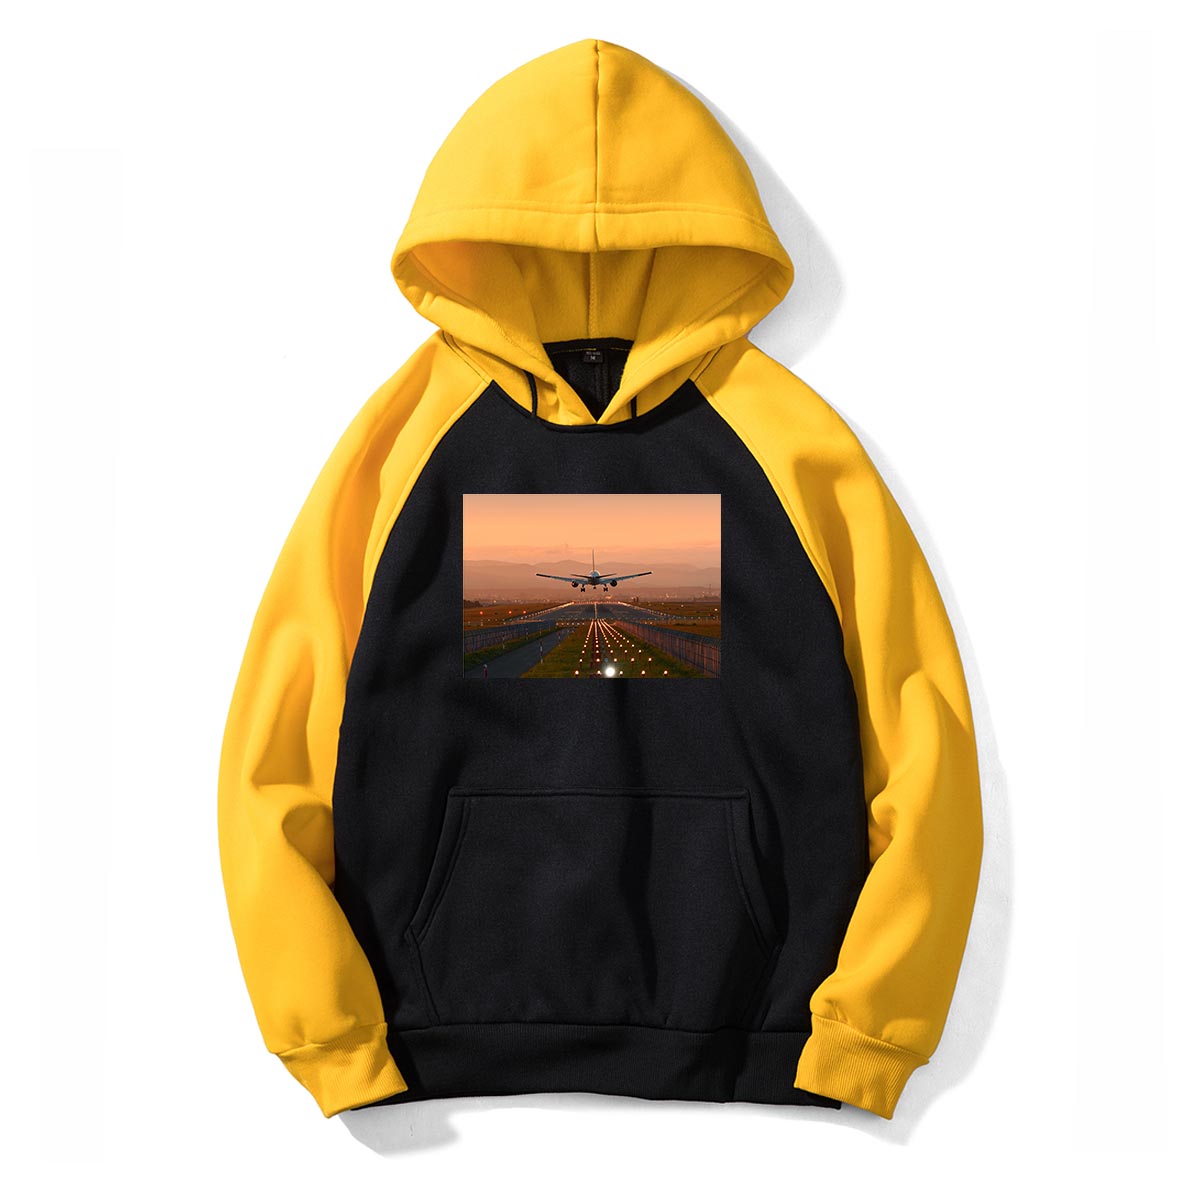 Super Cool Landing During Sunset Designed Colourful Hoodies